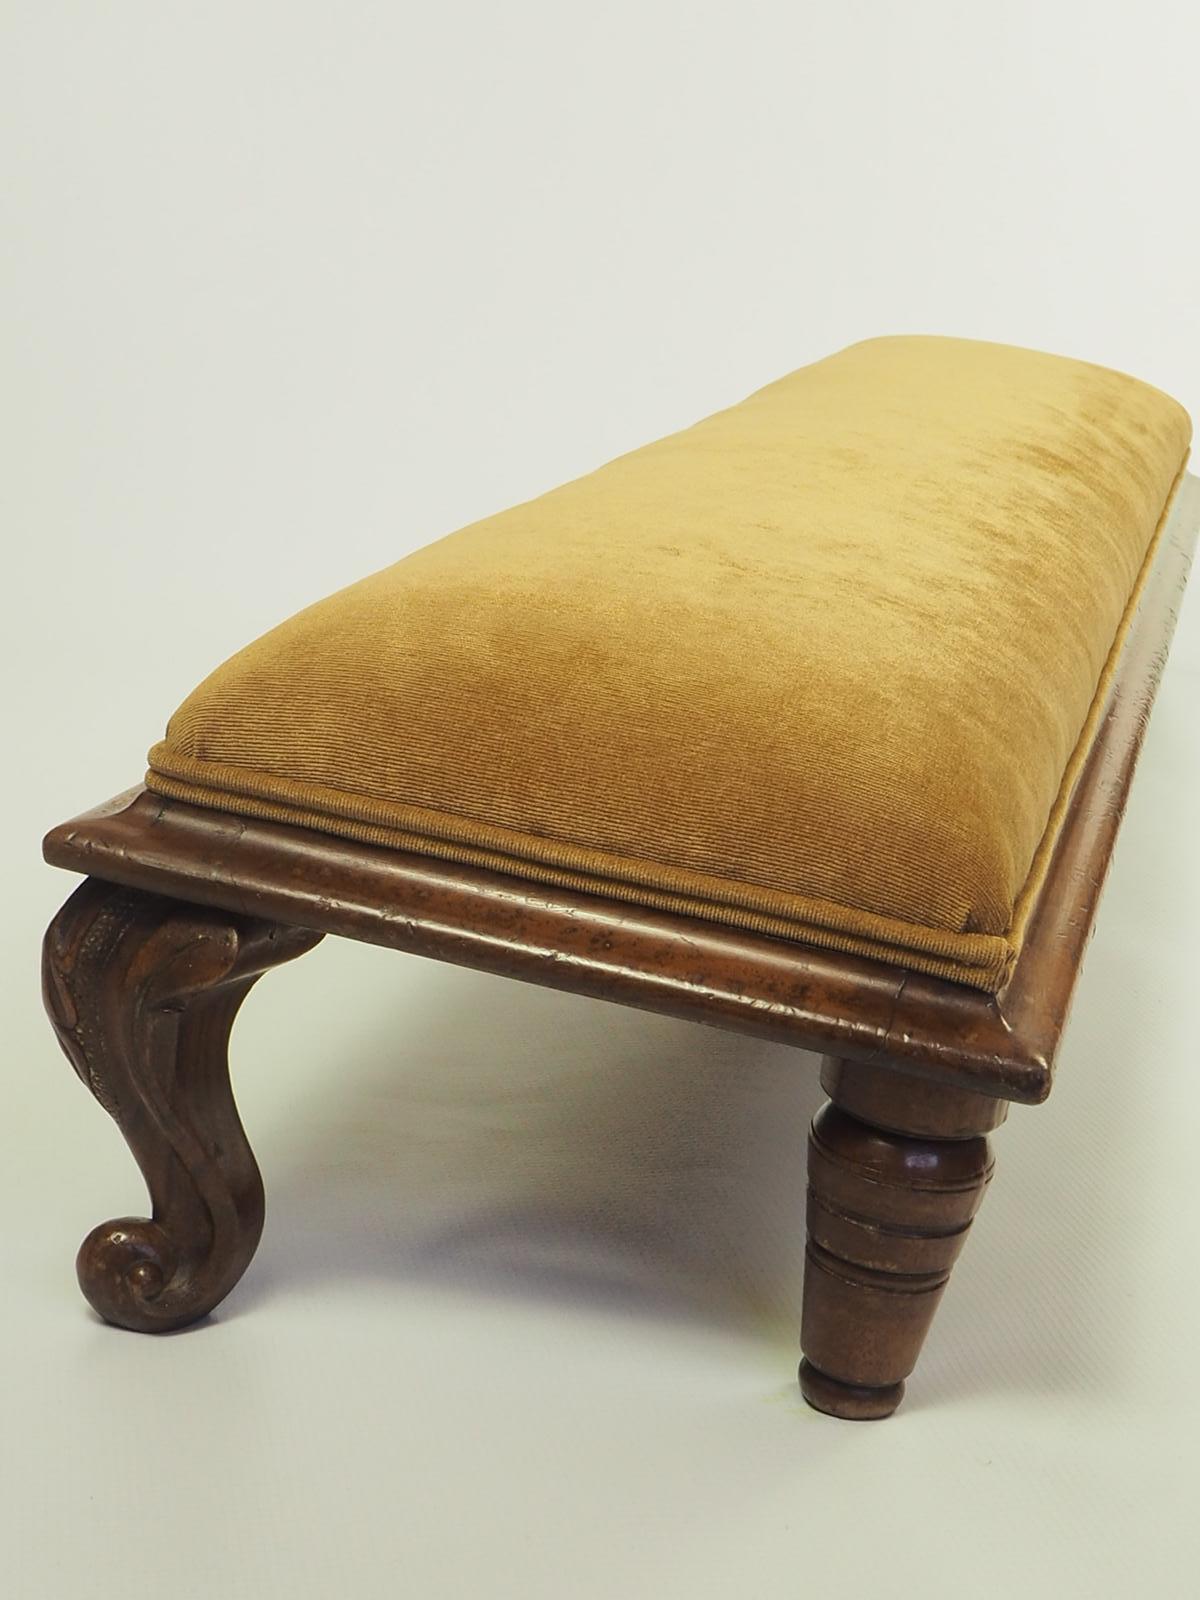 This is an antique fireside foot rest. An English, Walnut kneeling stool, dating to the early Victorian period, circa 1860

A very beautiful solid walnut frame over a meter wide in a graduated position, raised on cabriole legs – perfect for